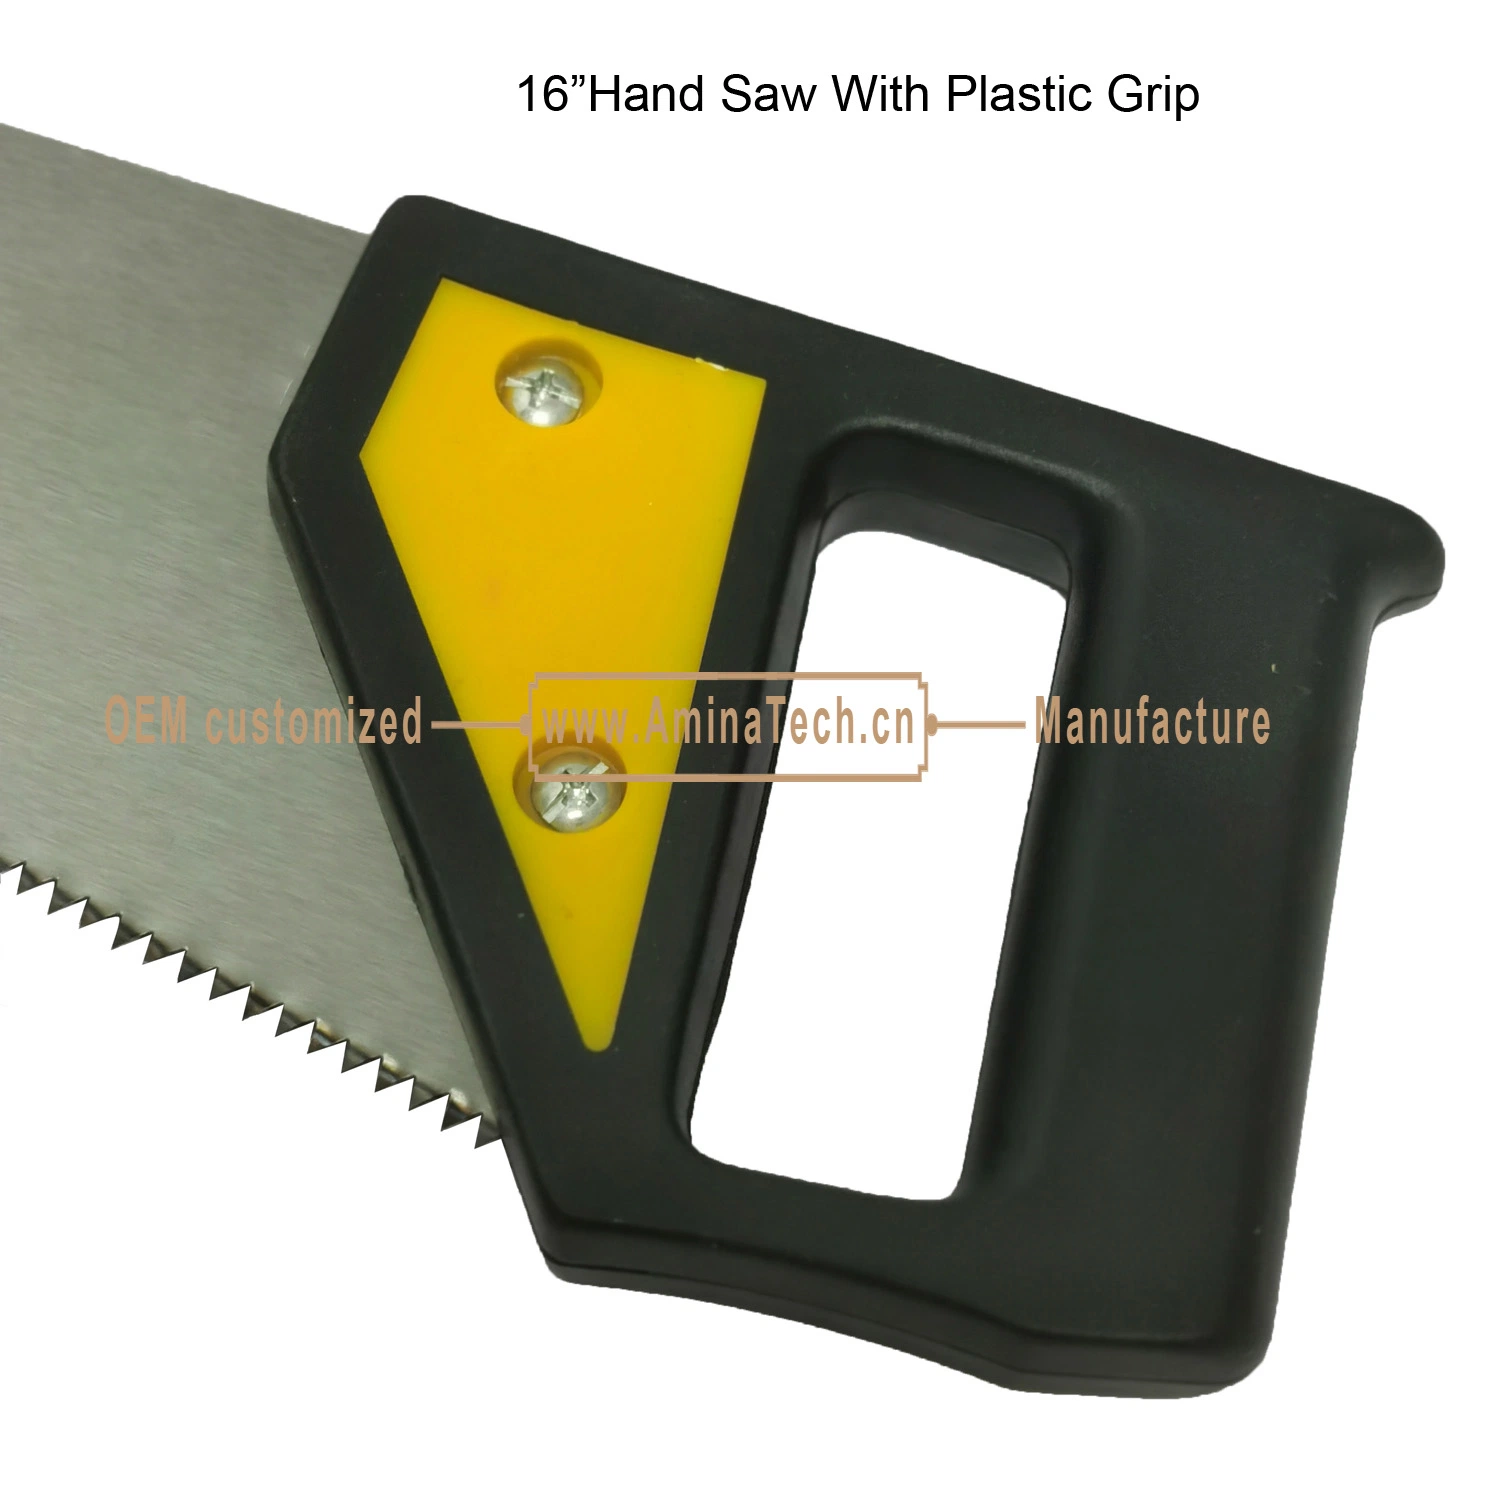 16&rdquor;Hand Saw With Plastic Grip,Hand Tools,garden tool